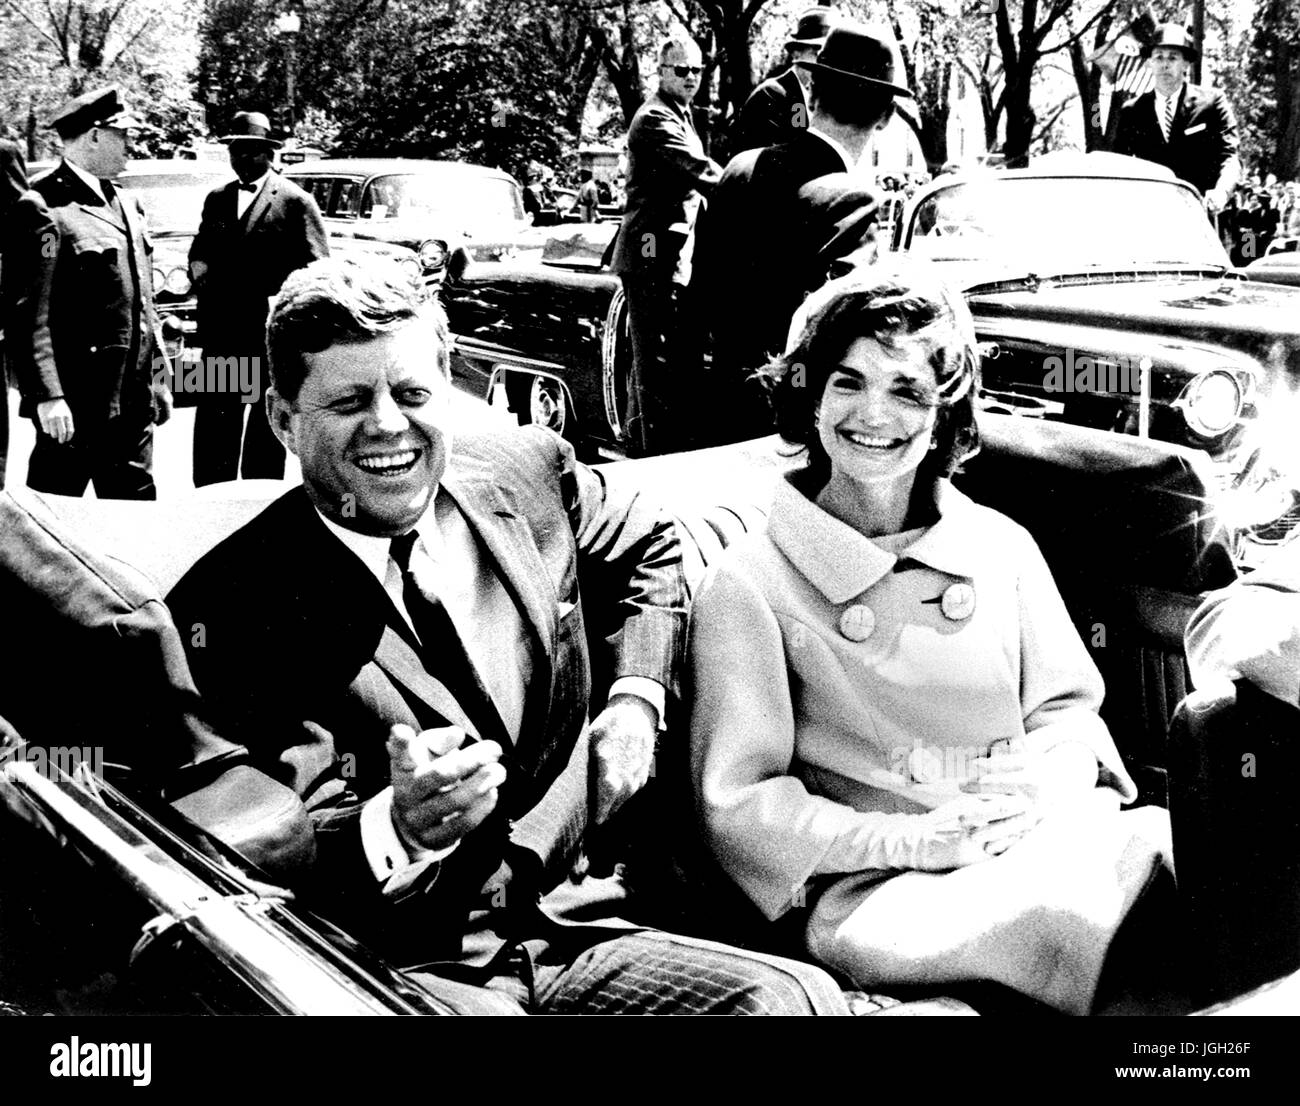 US President John F Kennedy and Jacqueline Kennedy smile while sitting in the back seat of an open car, John Kennedy pointing towards the camera, May 3, 1961. Courtesy Abbie Rowe/National Parks Service. Stock Photo